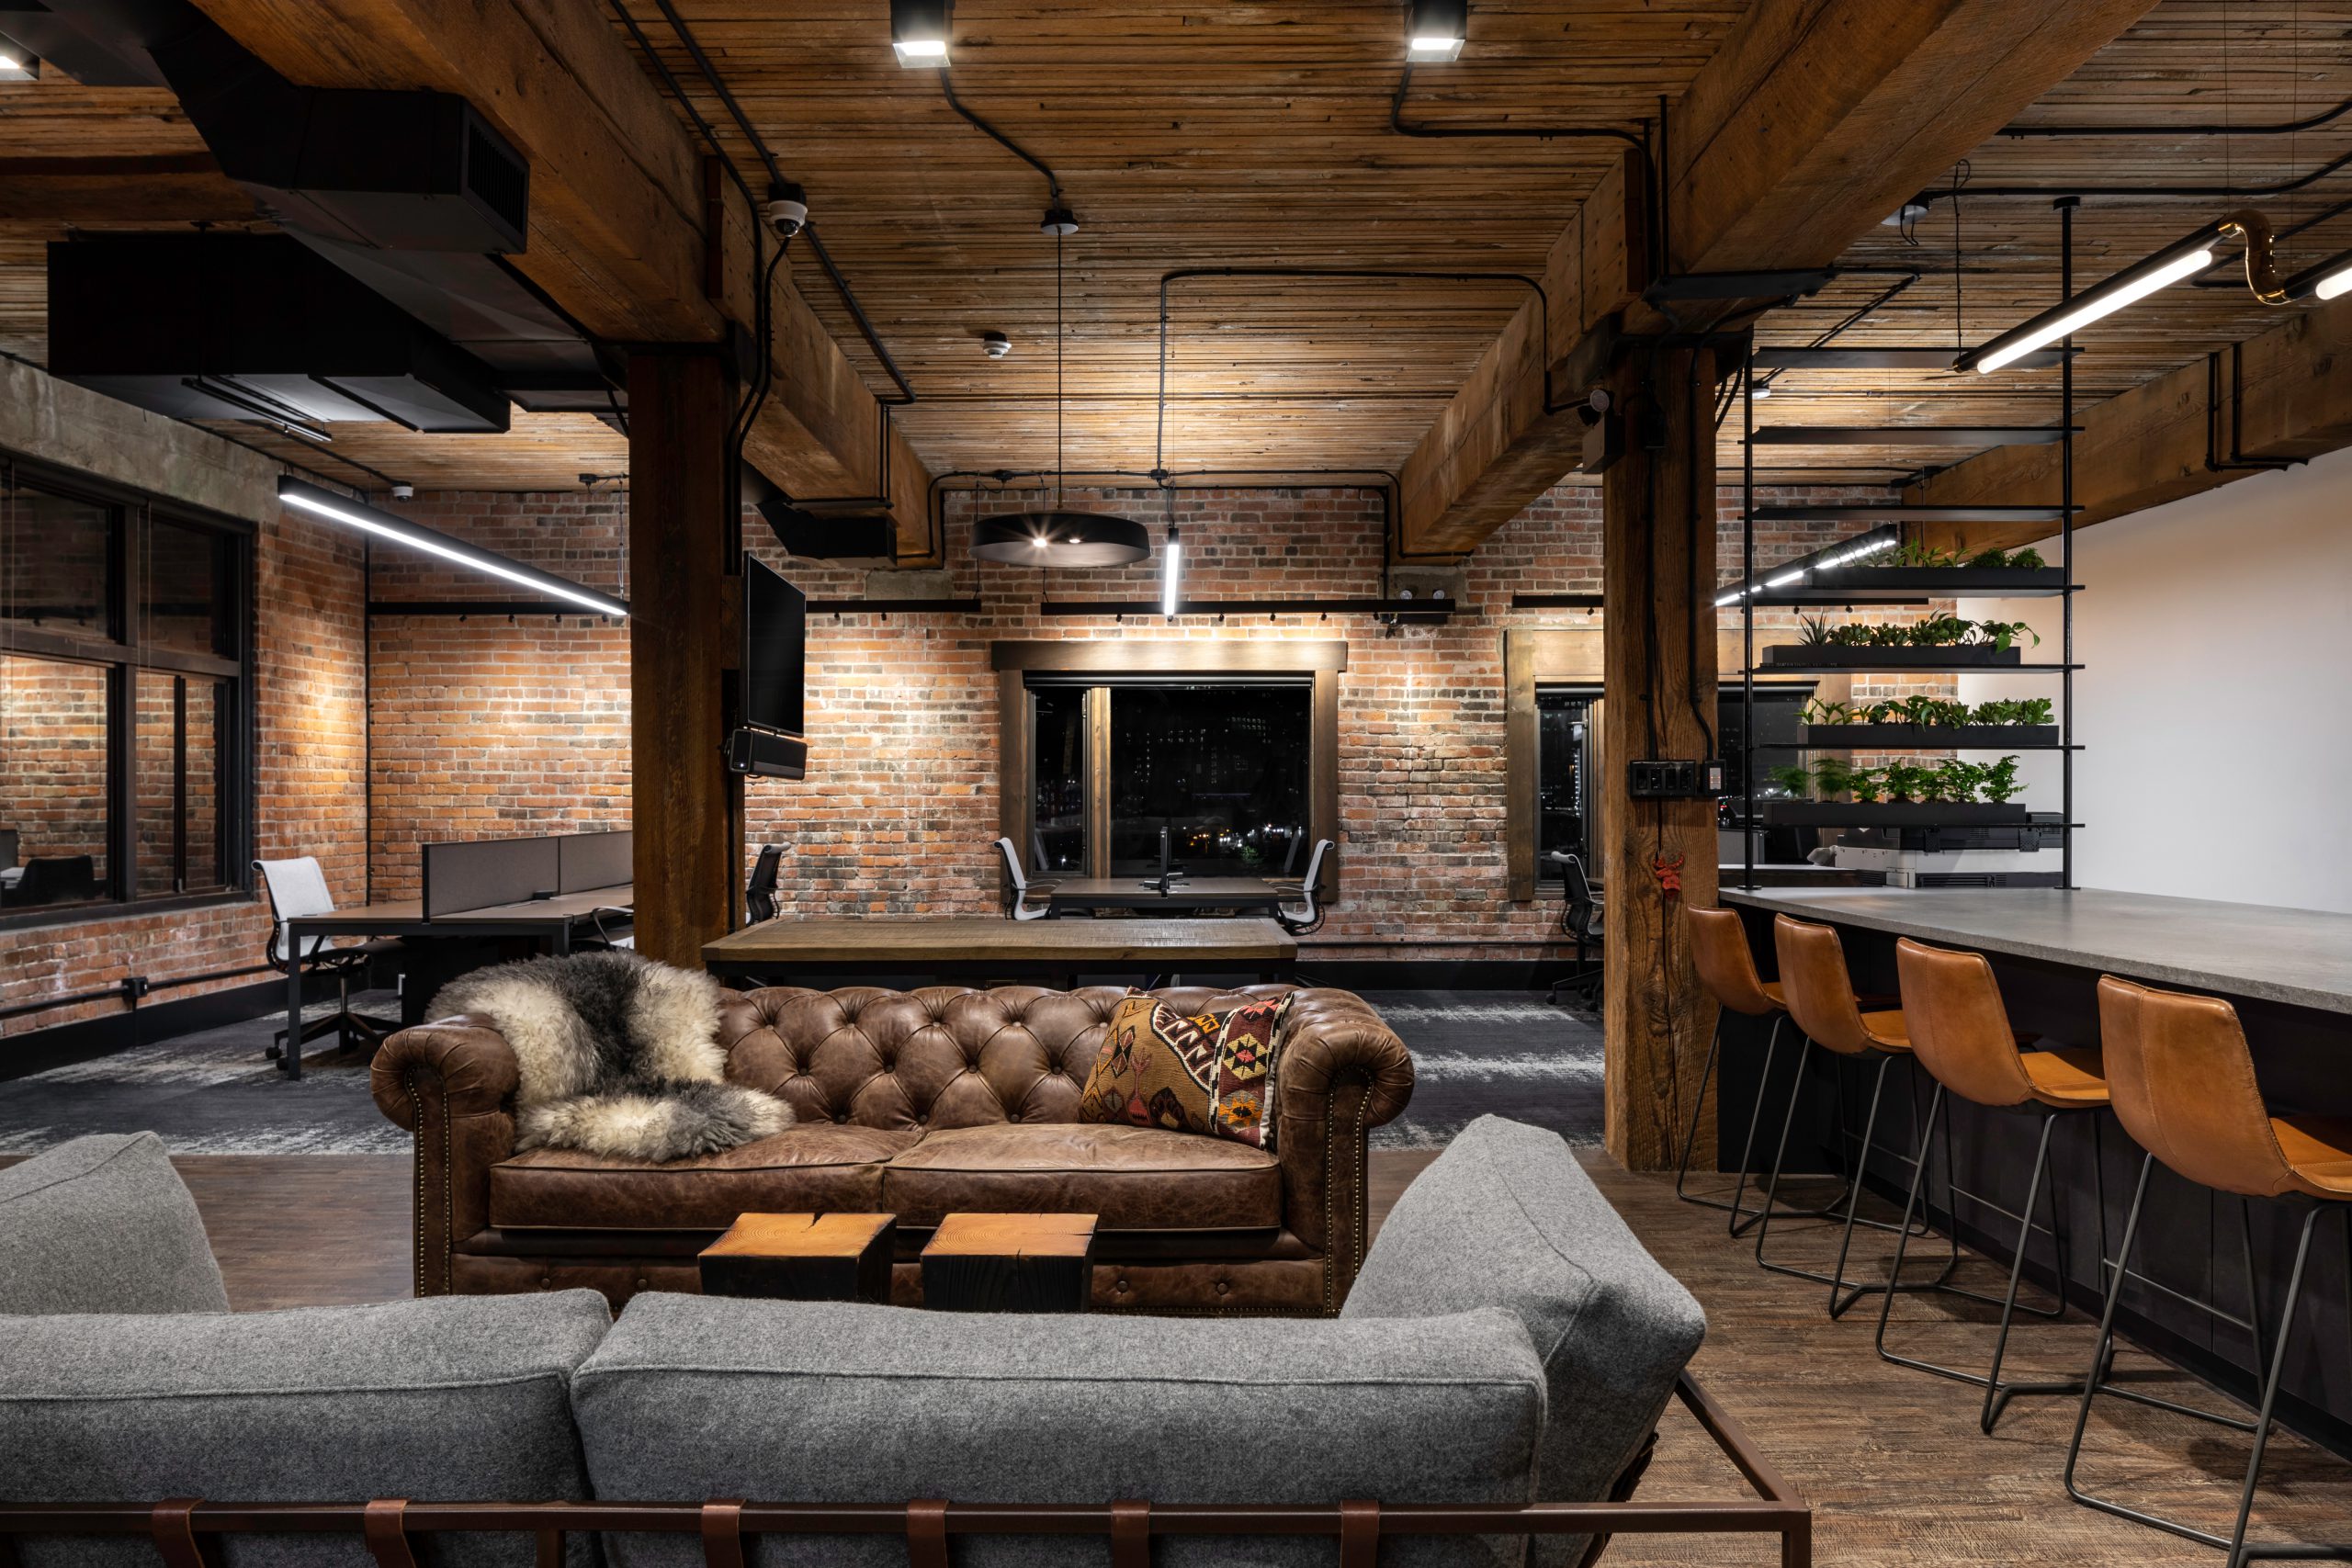 Corporate lounge and workstations at Key Marketing in Vancouver BC, showing bricks walls, wooden pillars, bar, couches, and lighting fixtures